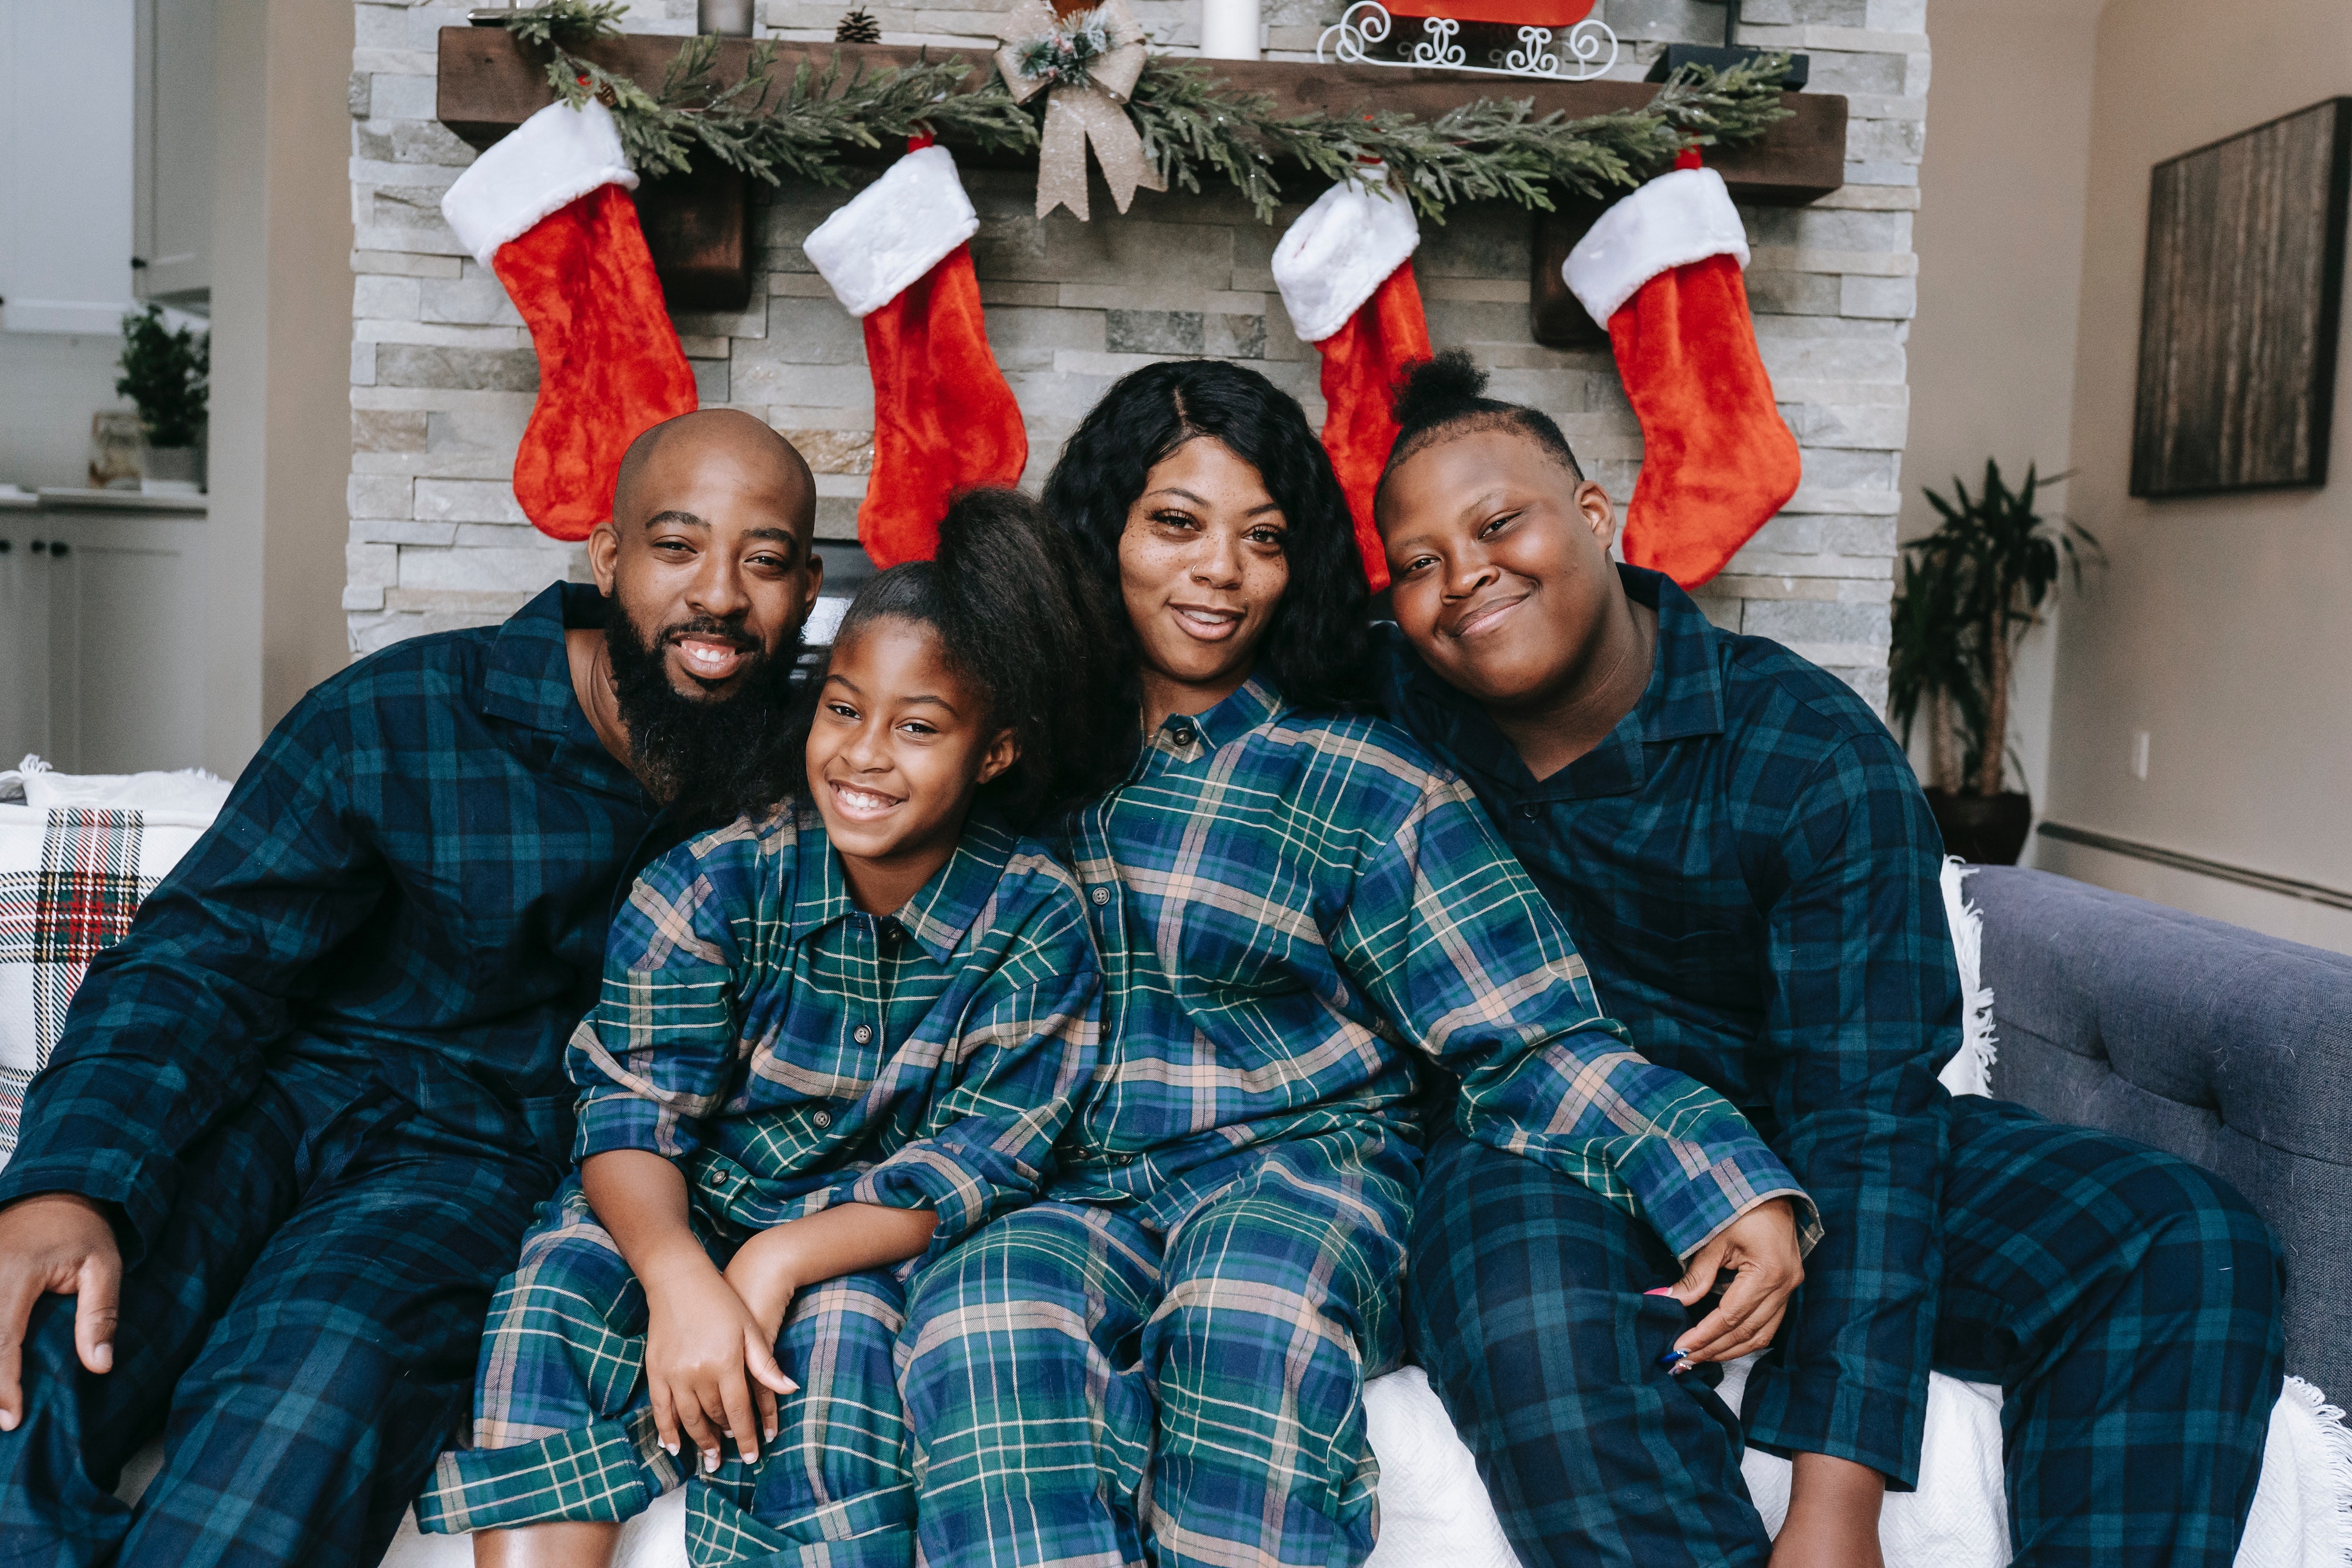 10 Best Family Christmas Pajamas For Matching Holiday Cheer | The Manual